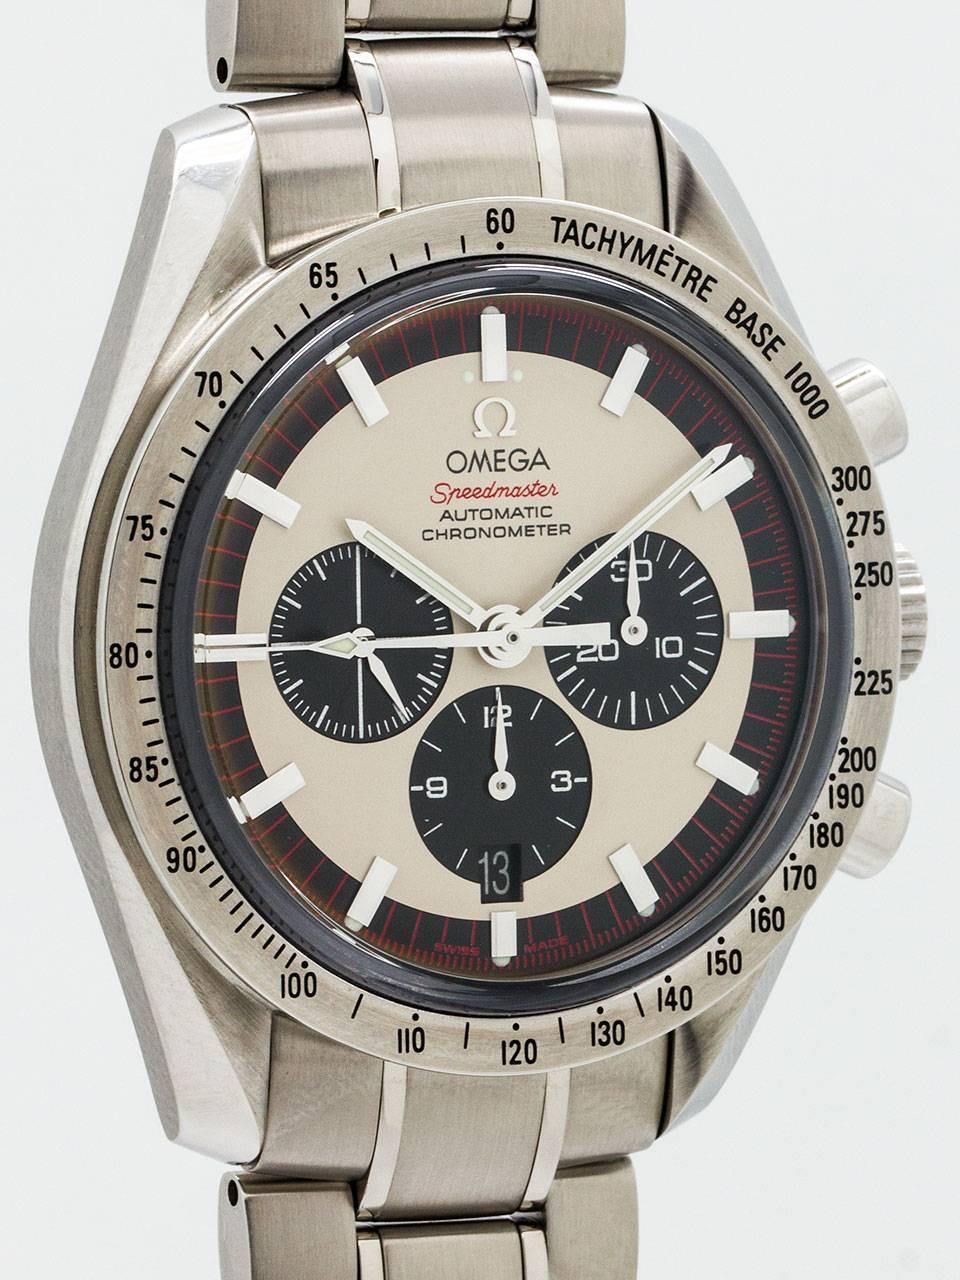 Omega Speedmaster Chronograph Michael Schumacher The Legend ref circa 2004. 42 x 48mm diameter case with steel tachometer bezel and sapphire crystal. Round chronograph pushers and signed Omega crown. So called “Panda” dial configuration with the